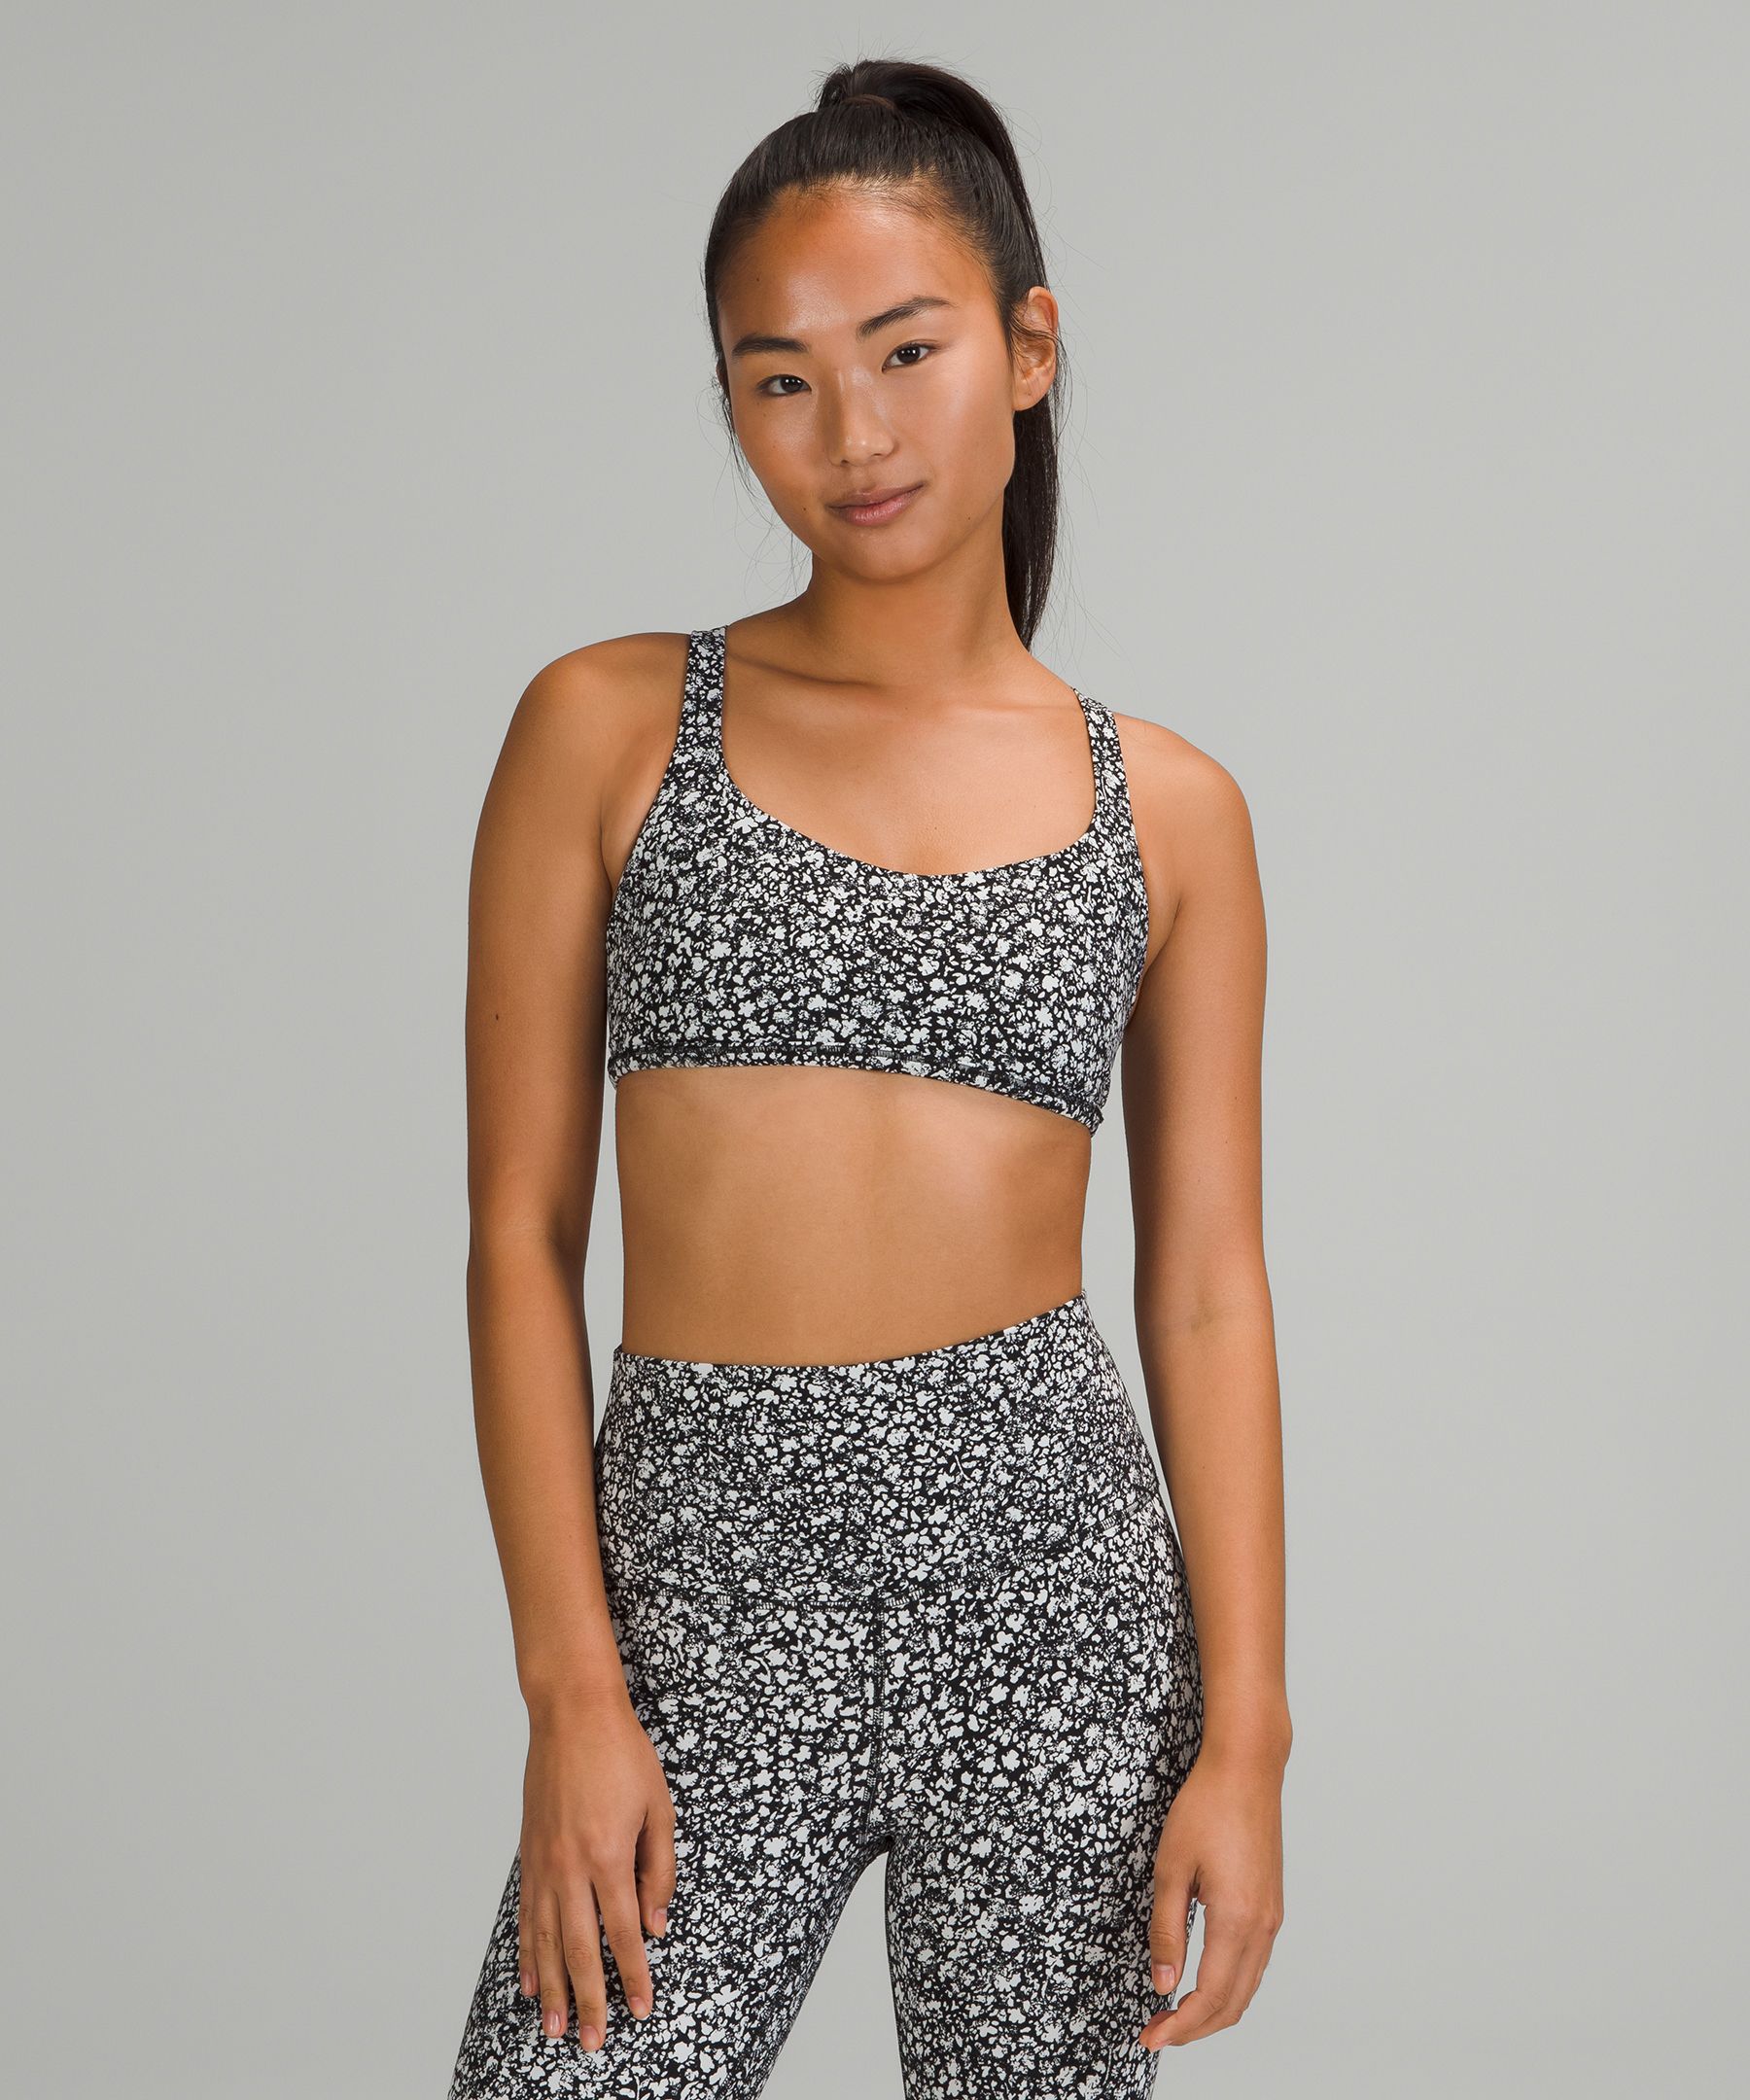 Lululemon Wild Light Support, A/b Cup In Venture Floral Alpine White Black/white